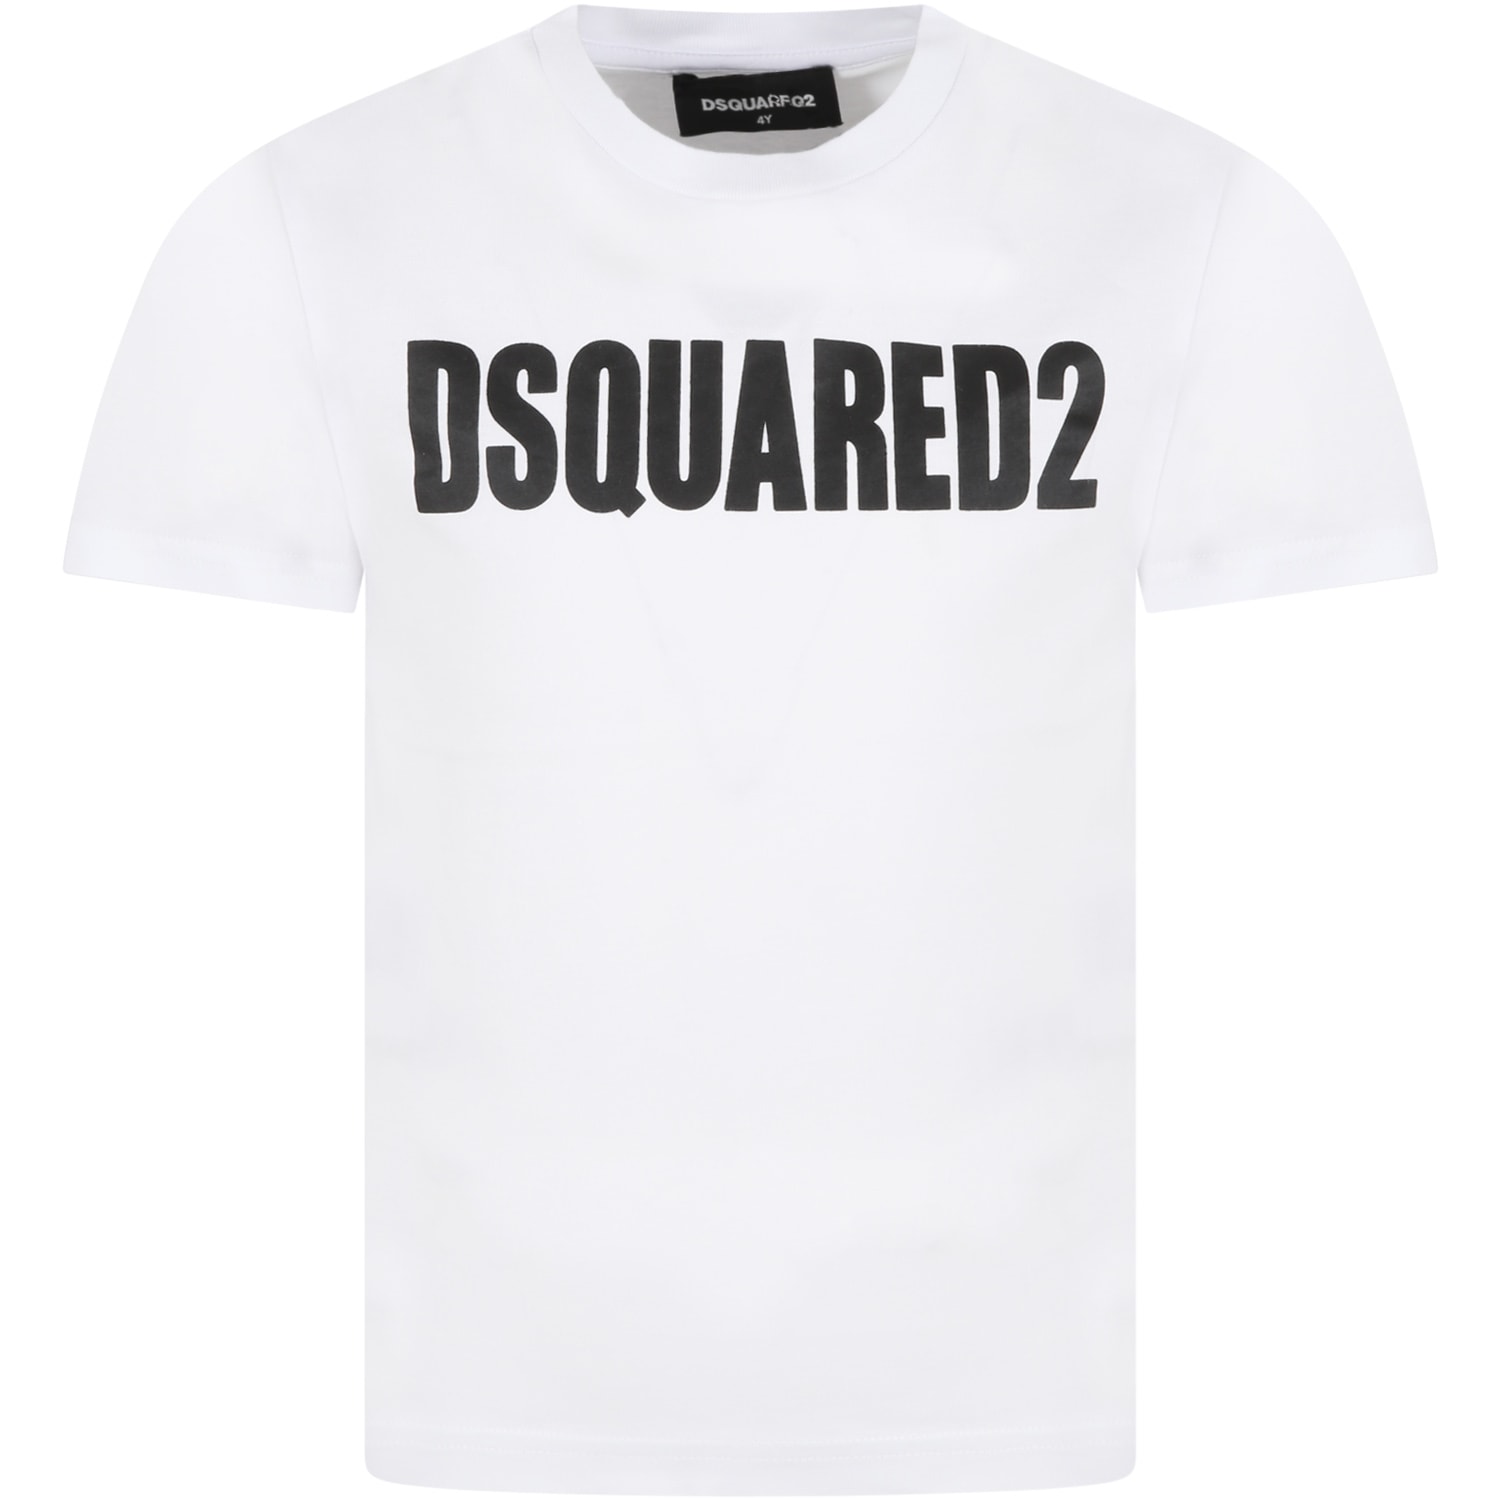 Dsquared2 White T-shirt For Kids With Black Logo